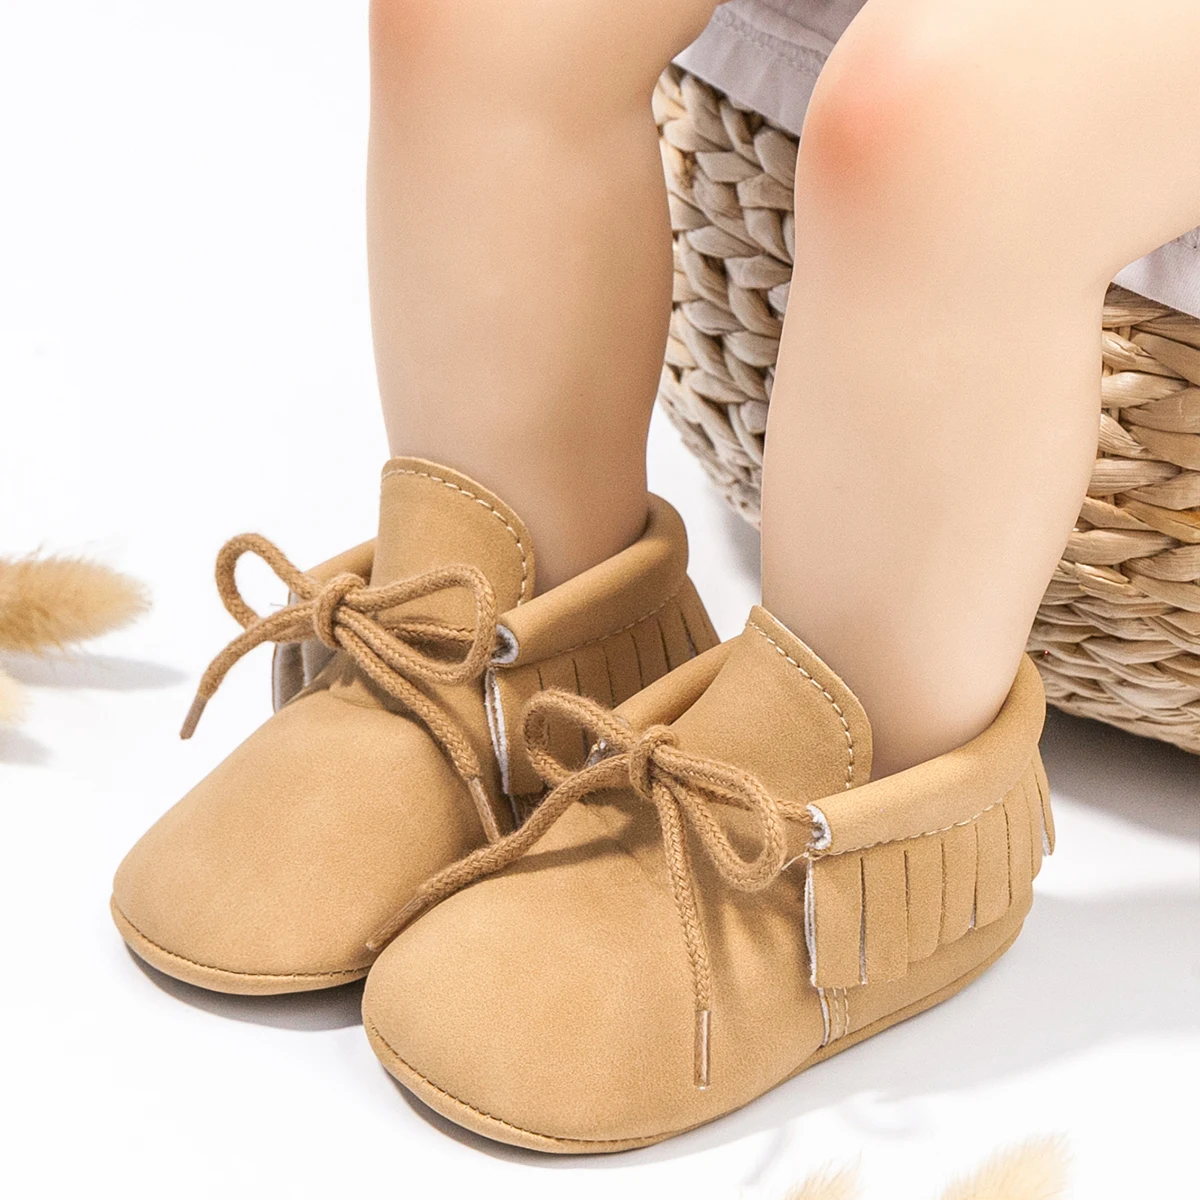 New designed indoor infant baby Handmade PU Leather Infant Toddler Girls Shoes Soft Sole Baby Casual Shoes